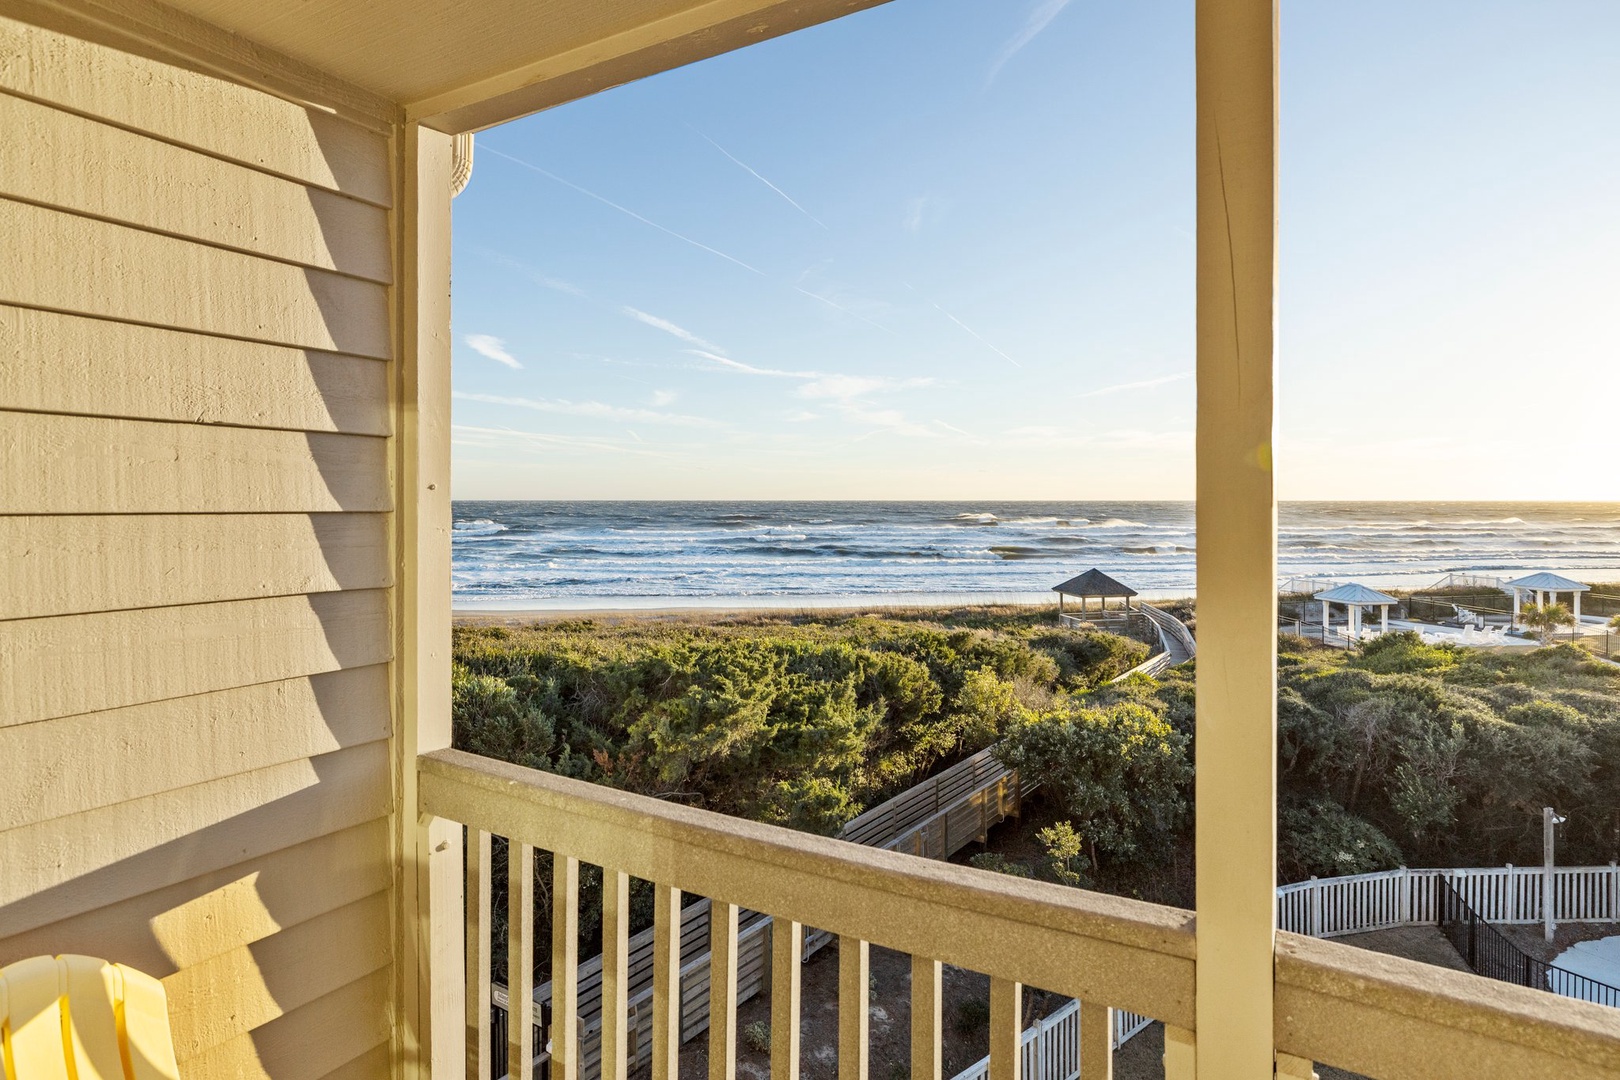 Balcony off primary bedroom with beach view